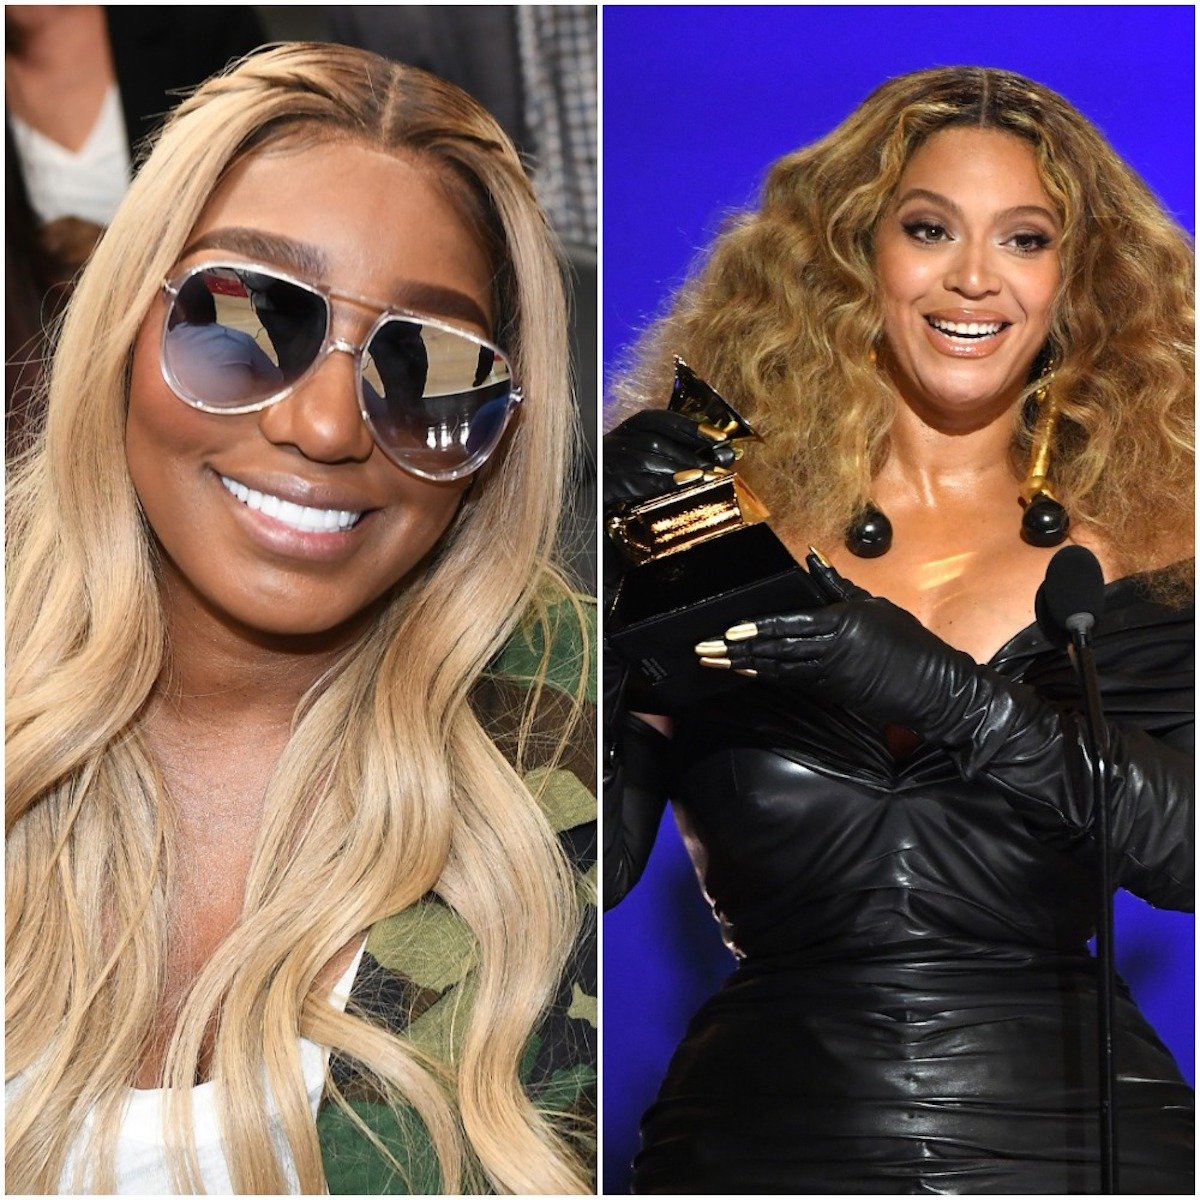 Nene Leakes and Beyonce